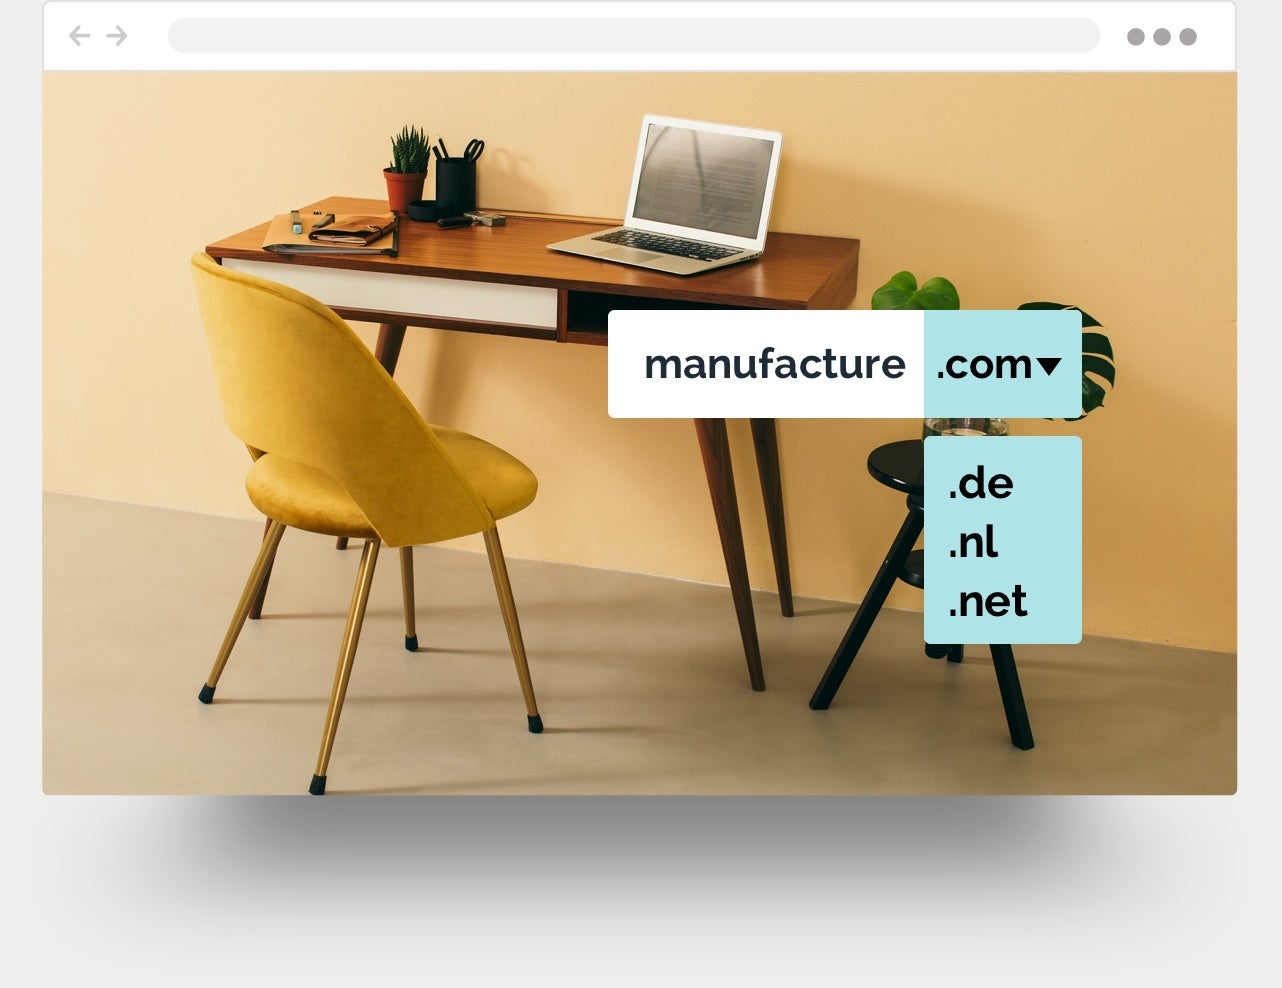 Example of a furniture website built with Jimdo.